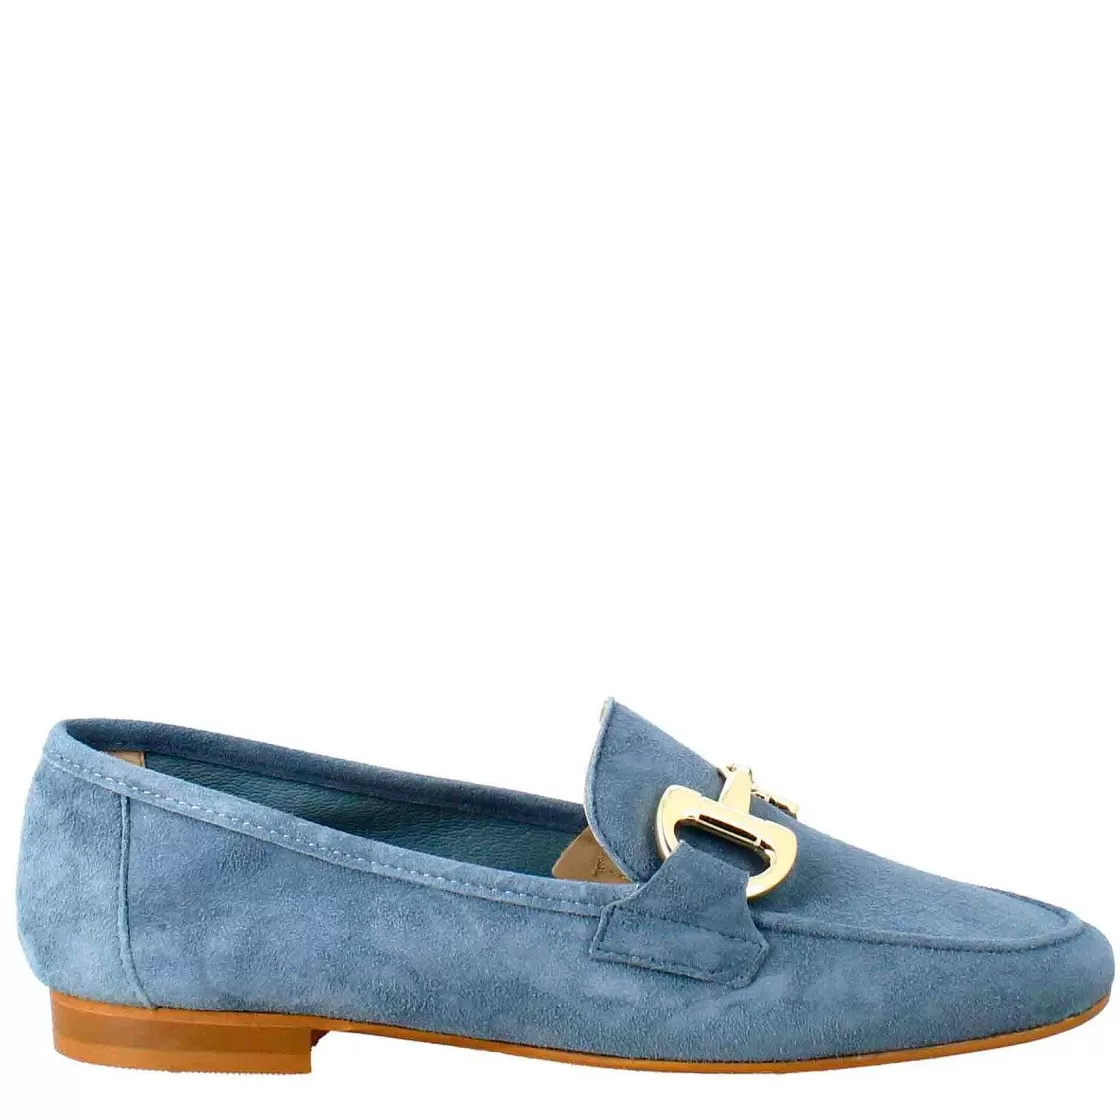 Leonardo Women'S Moccasin In Light Blue Suede With Gold Buckle Outlet